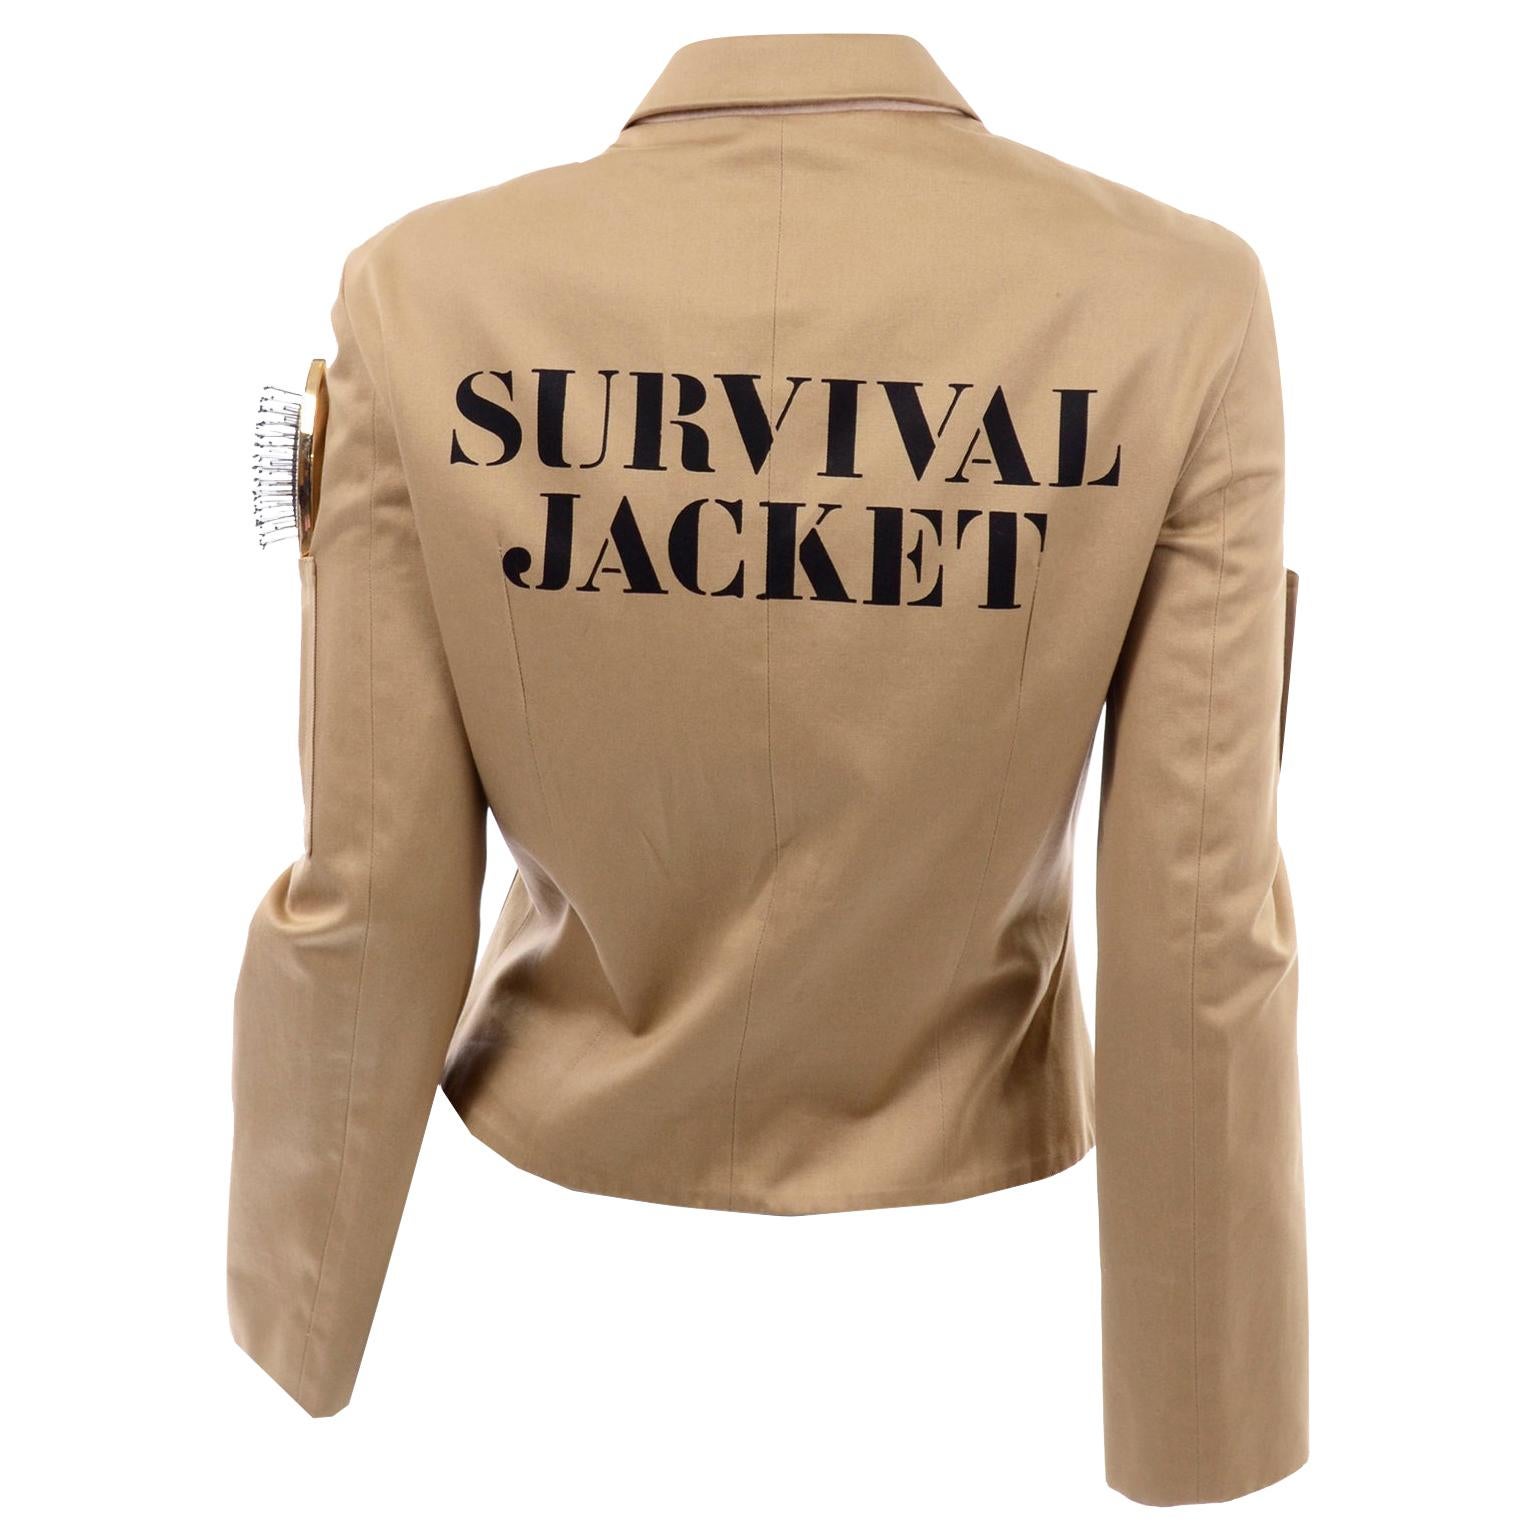 1991 Franco Moschino Couture Survival Jacke in Khaki Baumwolle Urban Jungle Tools